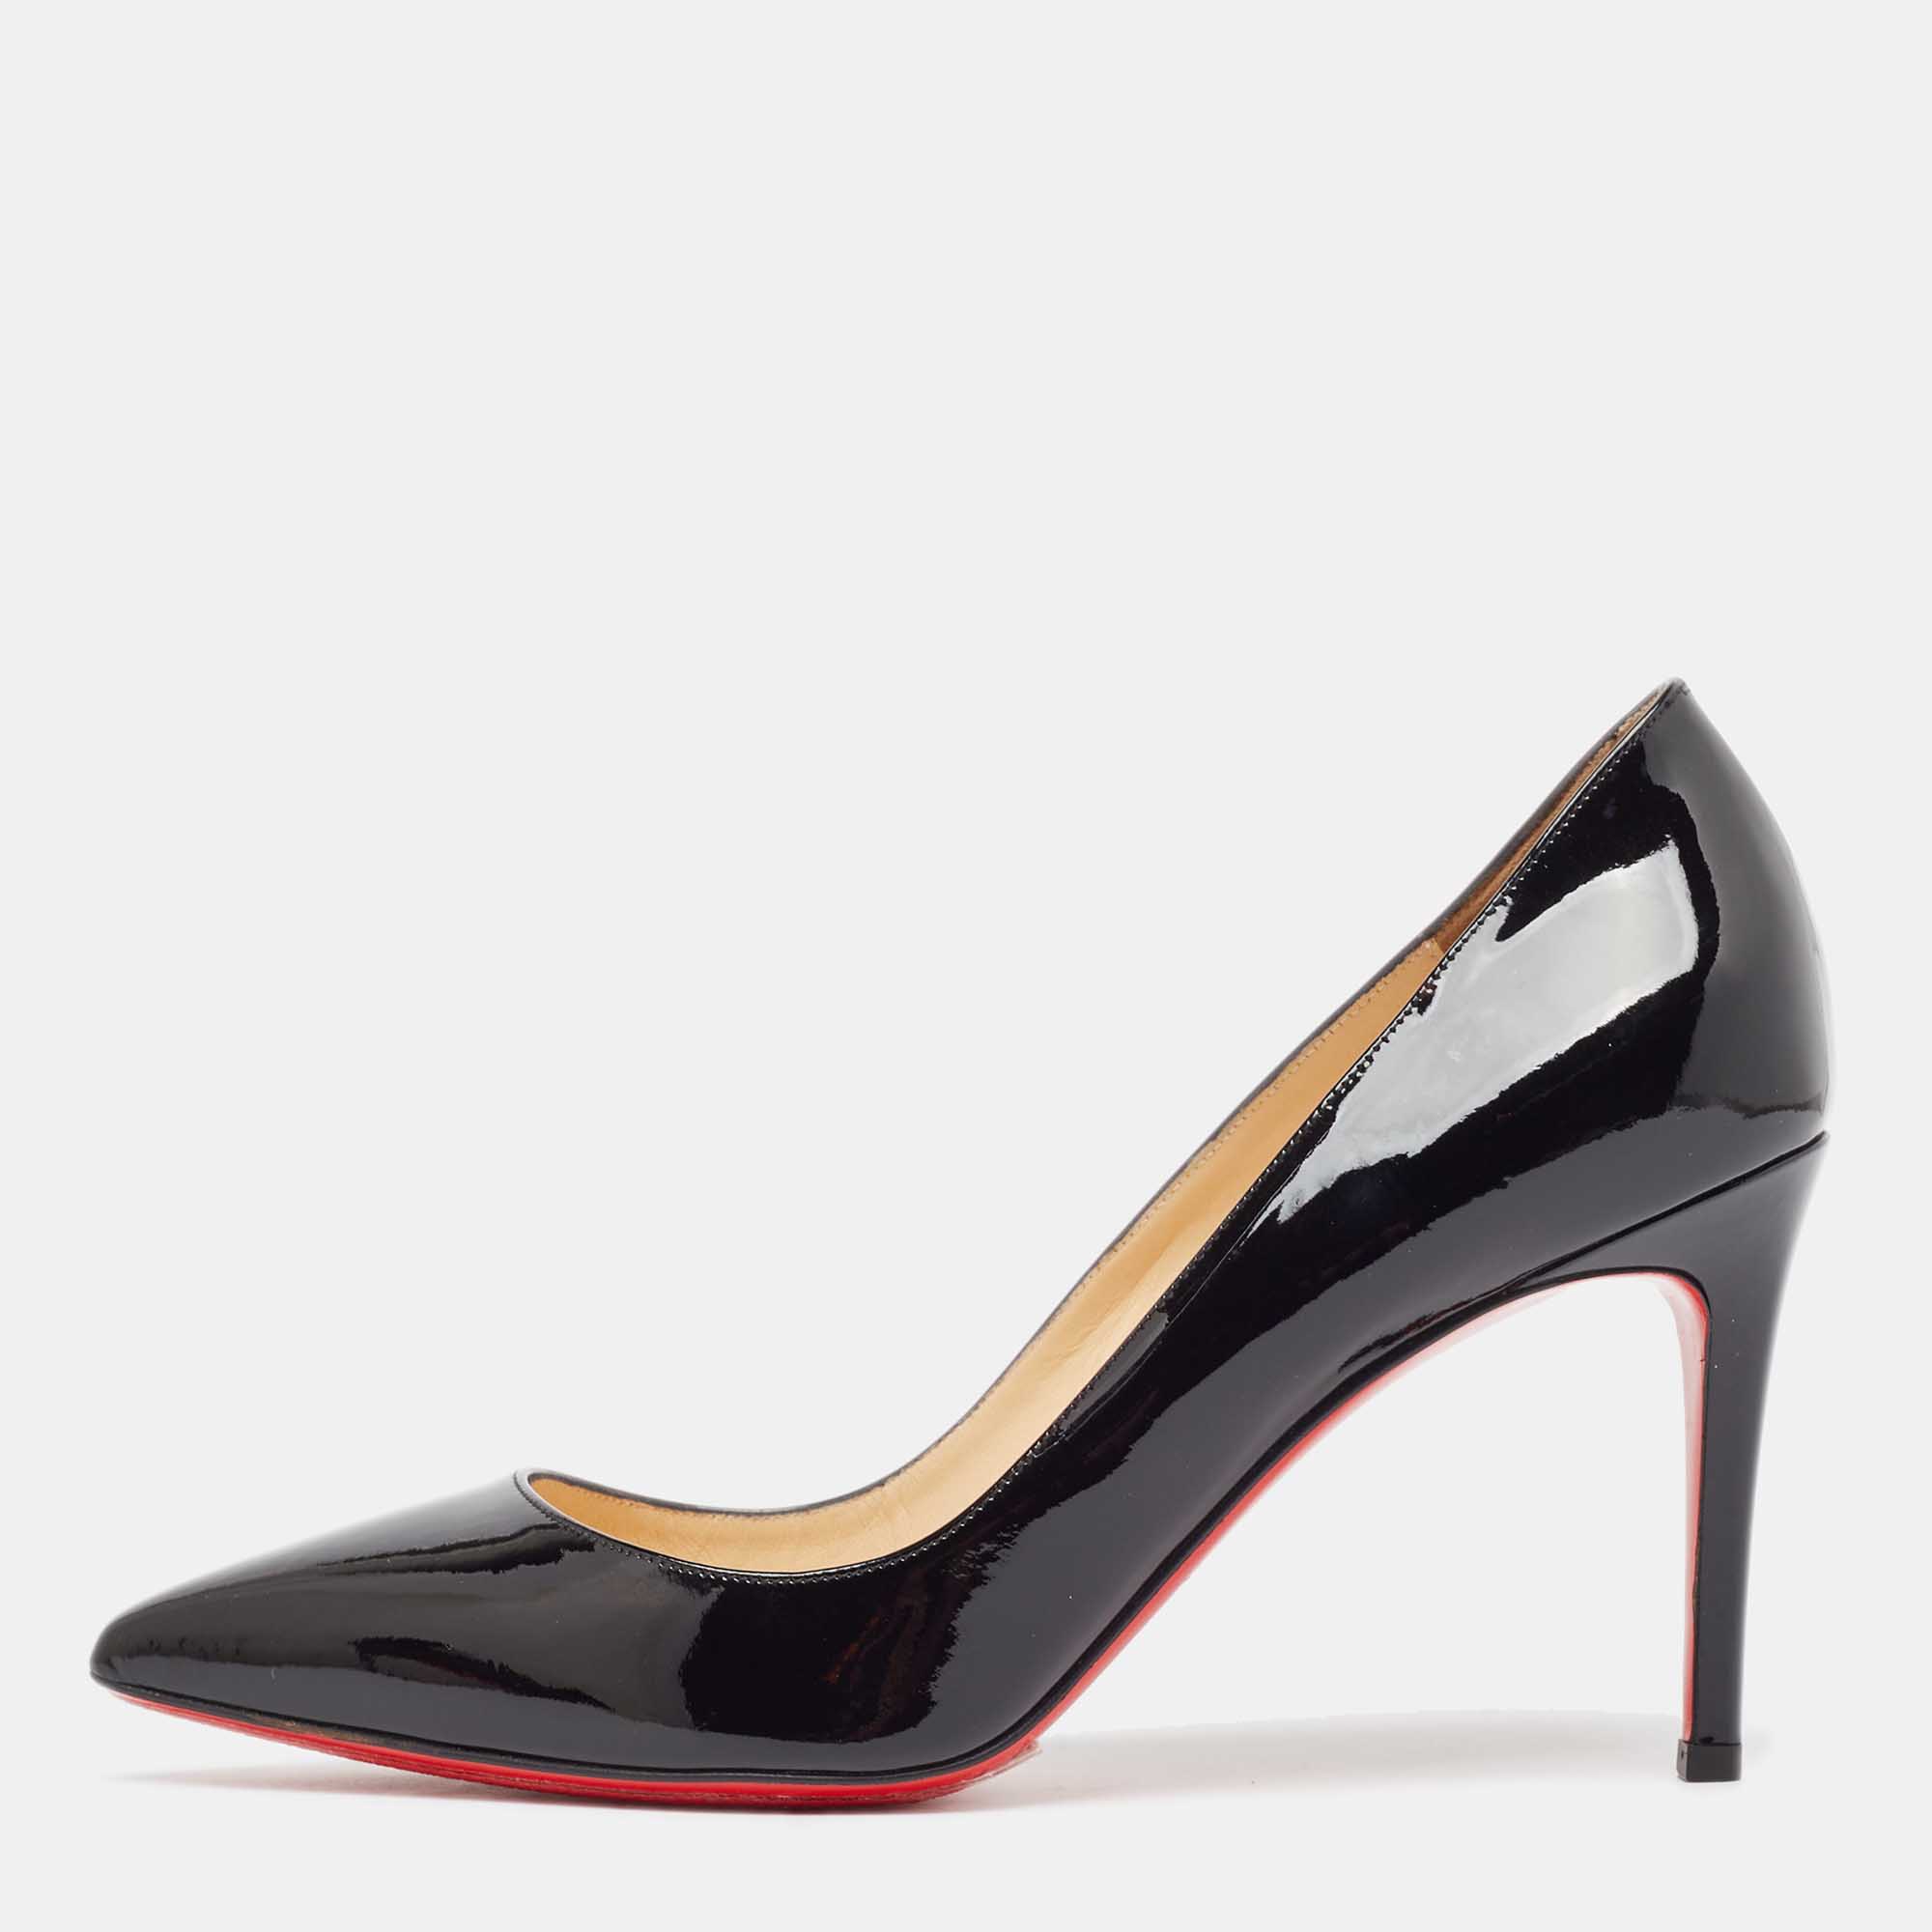 Christian louboutin black patent leather pigalle pumps size 39